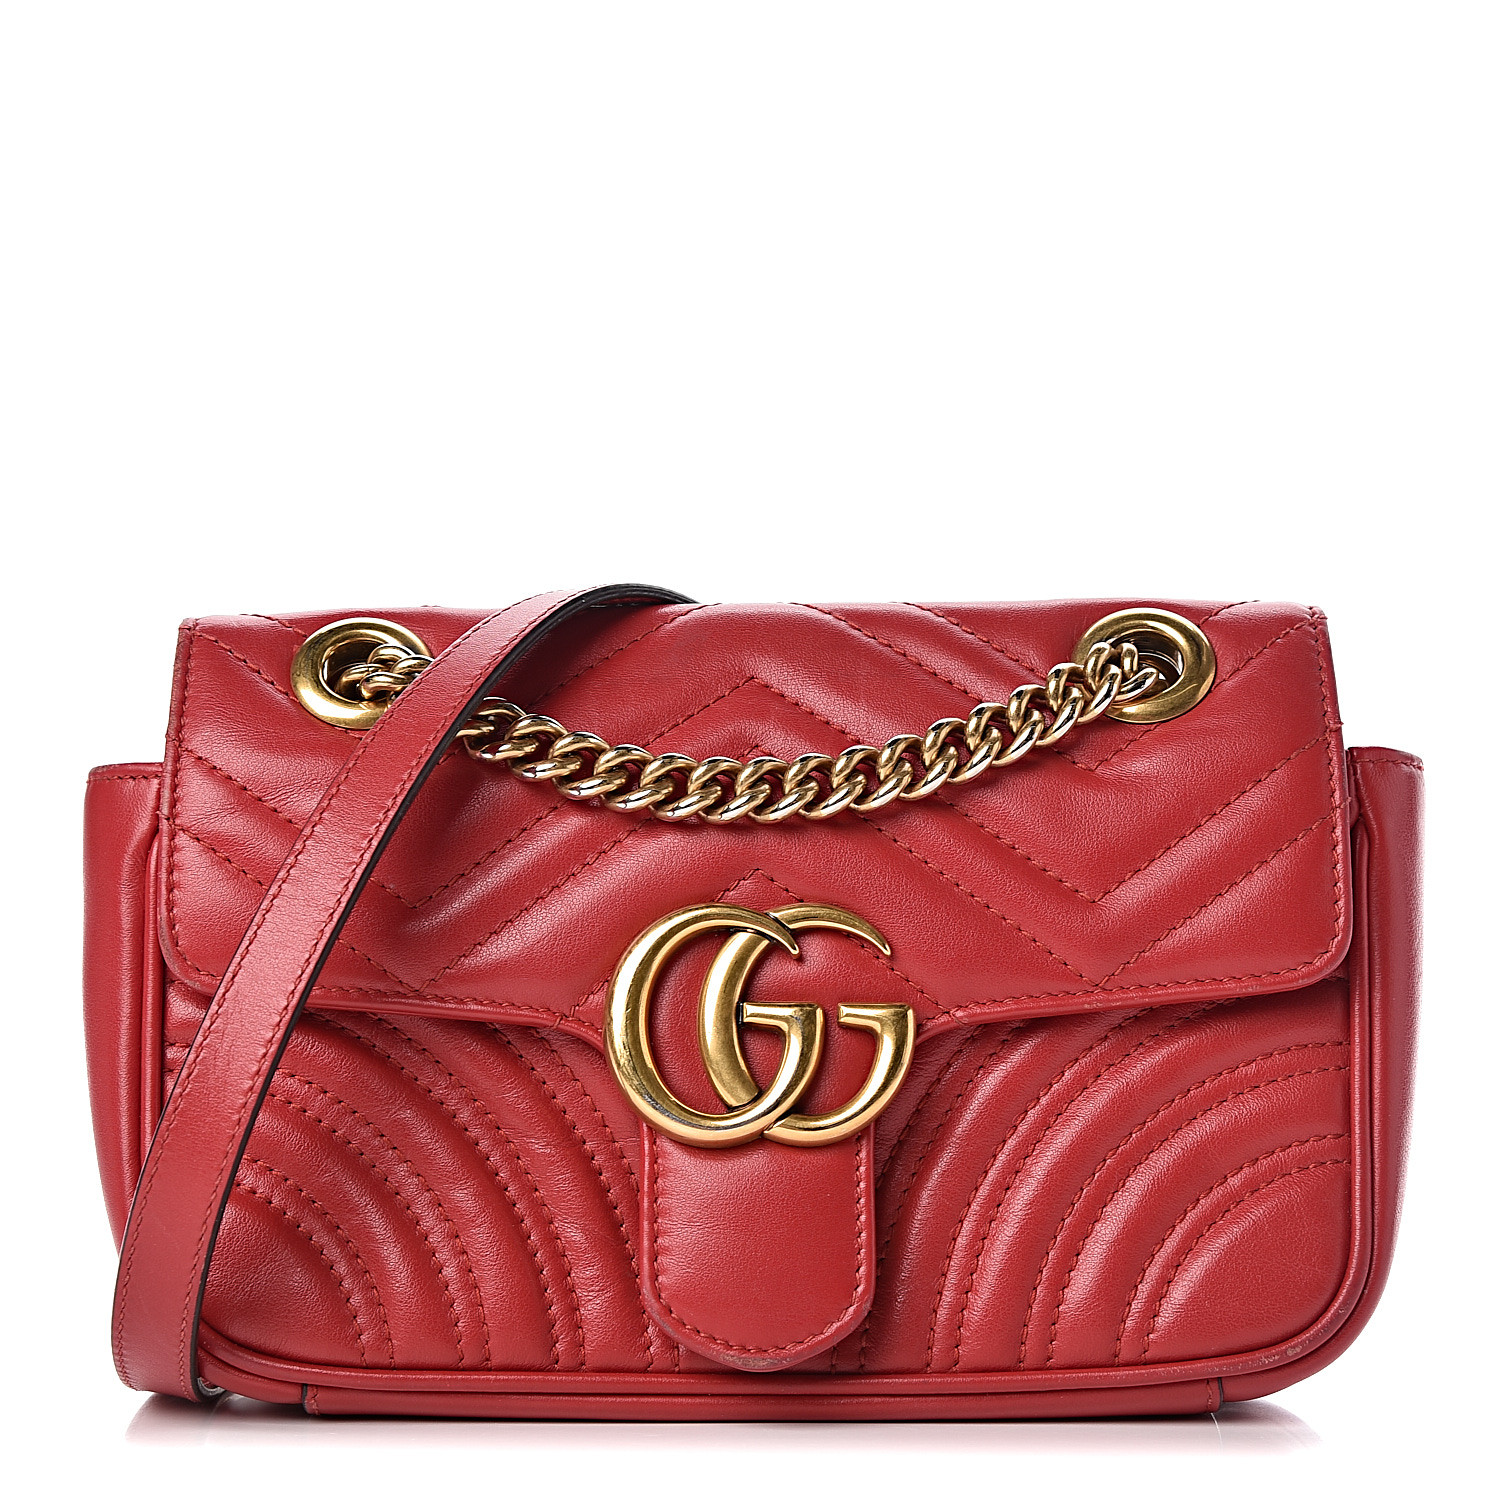 gucci marmont large red